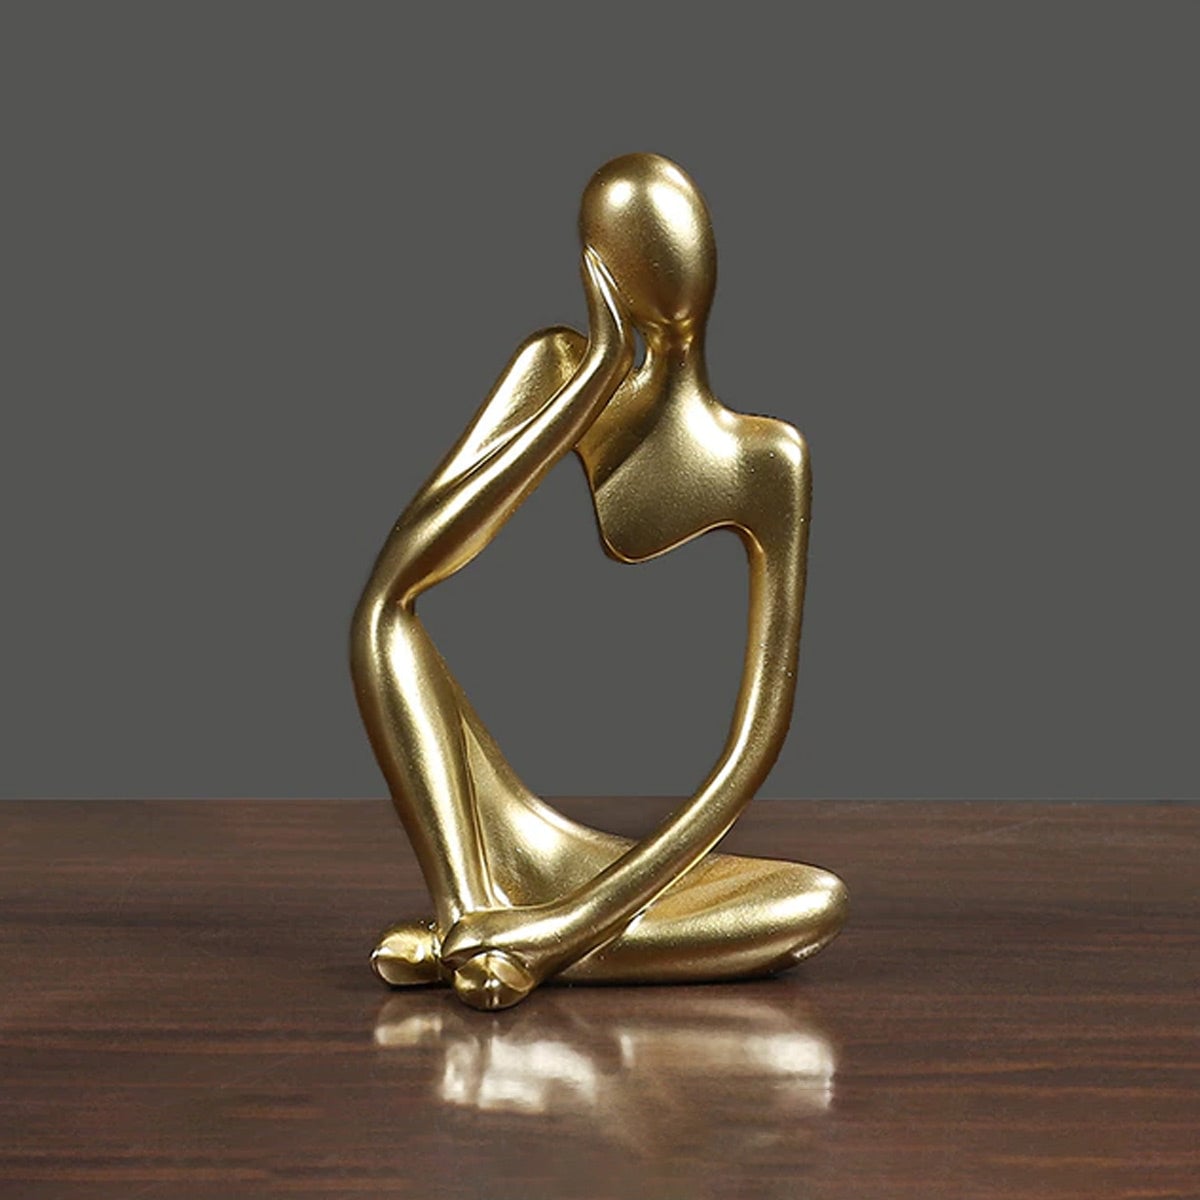 Thinker Statue Abstract Figure Sculpture Character Statue Ornaments Art